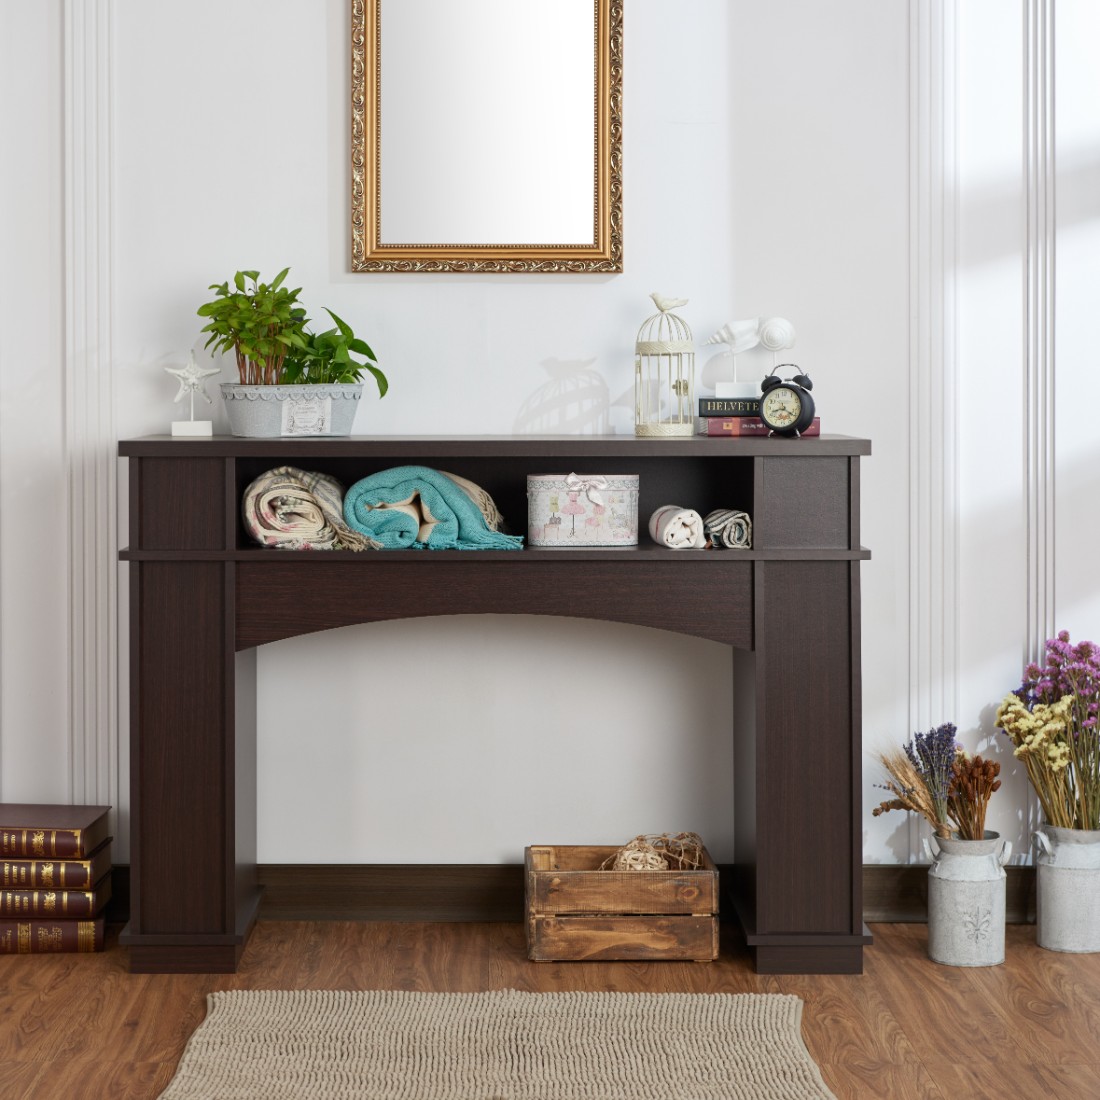 Picture of Furniture of America Gullitch Modern Console Table in Walnut - Enitial Lab HFW-1695C4